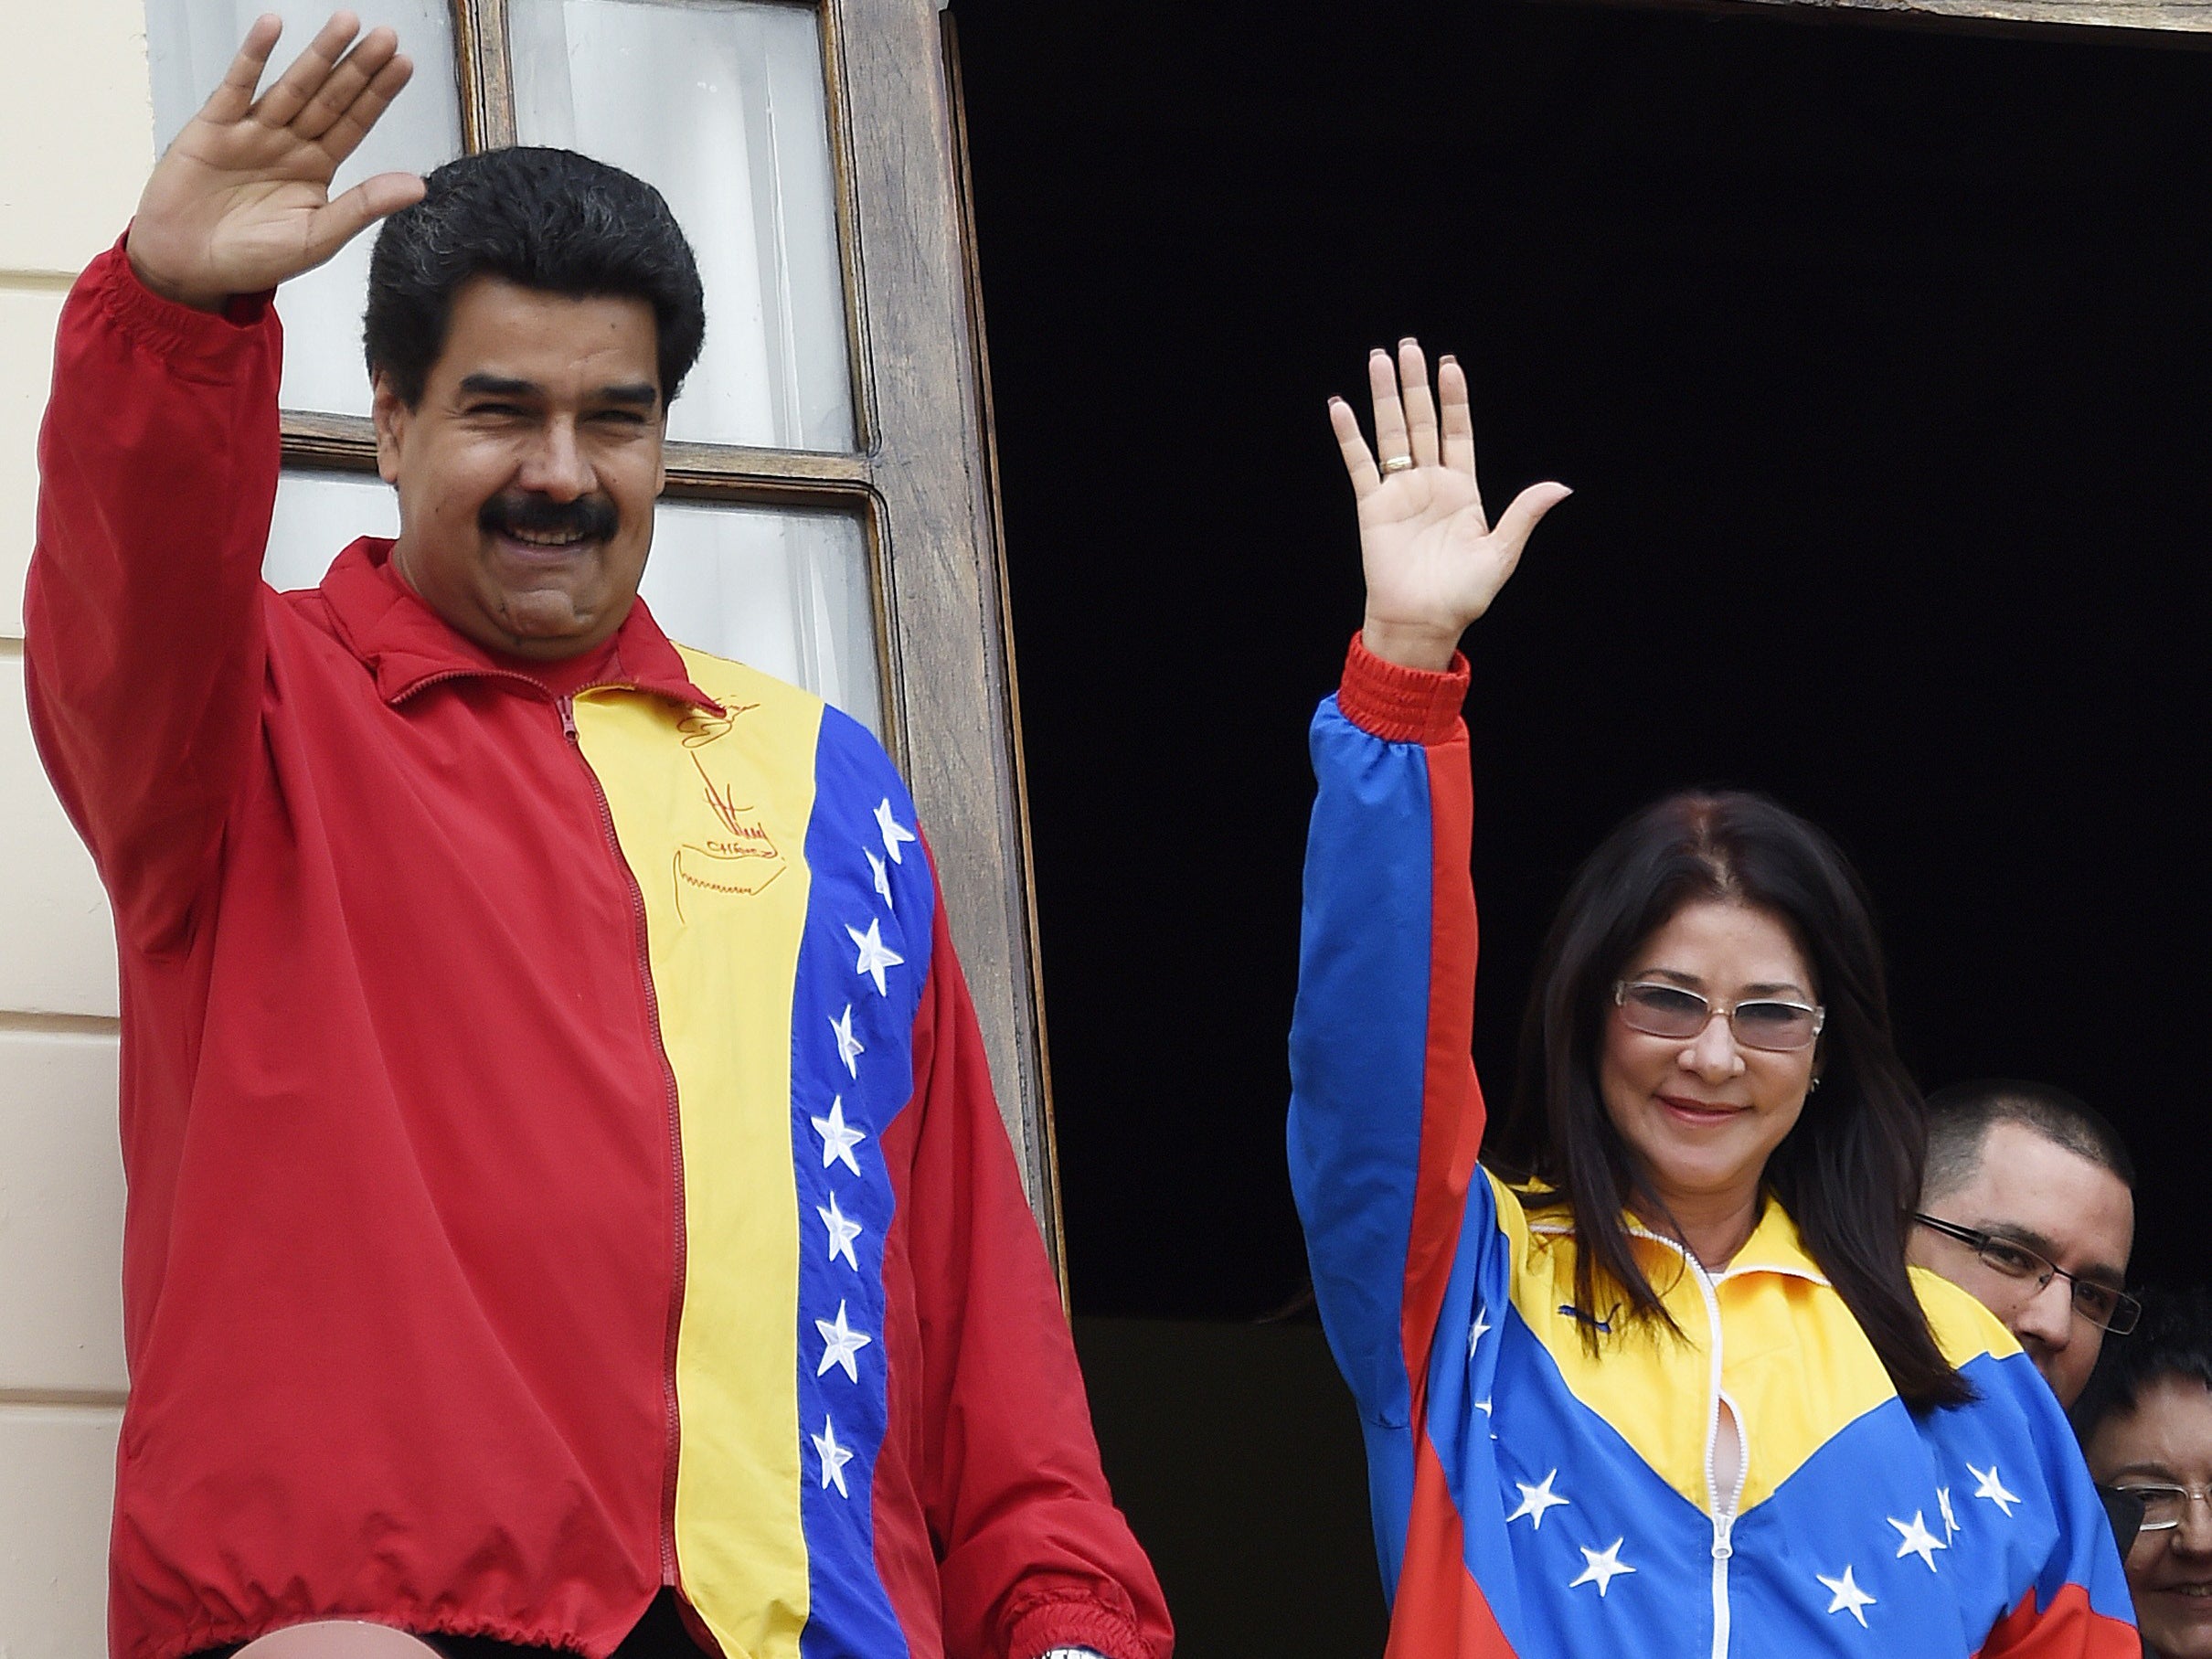 First Lady Flores is referred to as 'First Combatant' by President Maduro